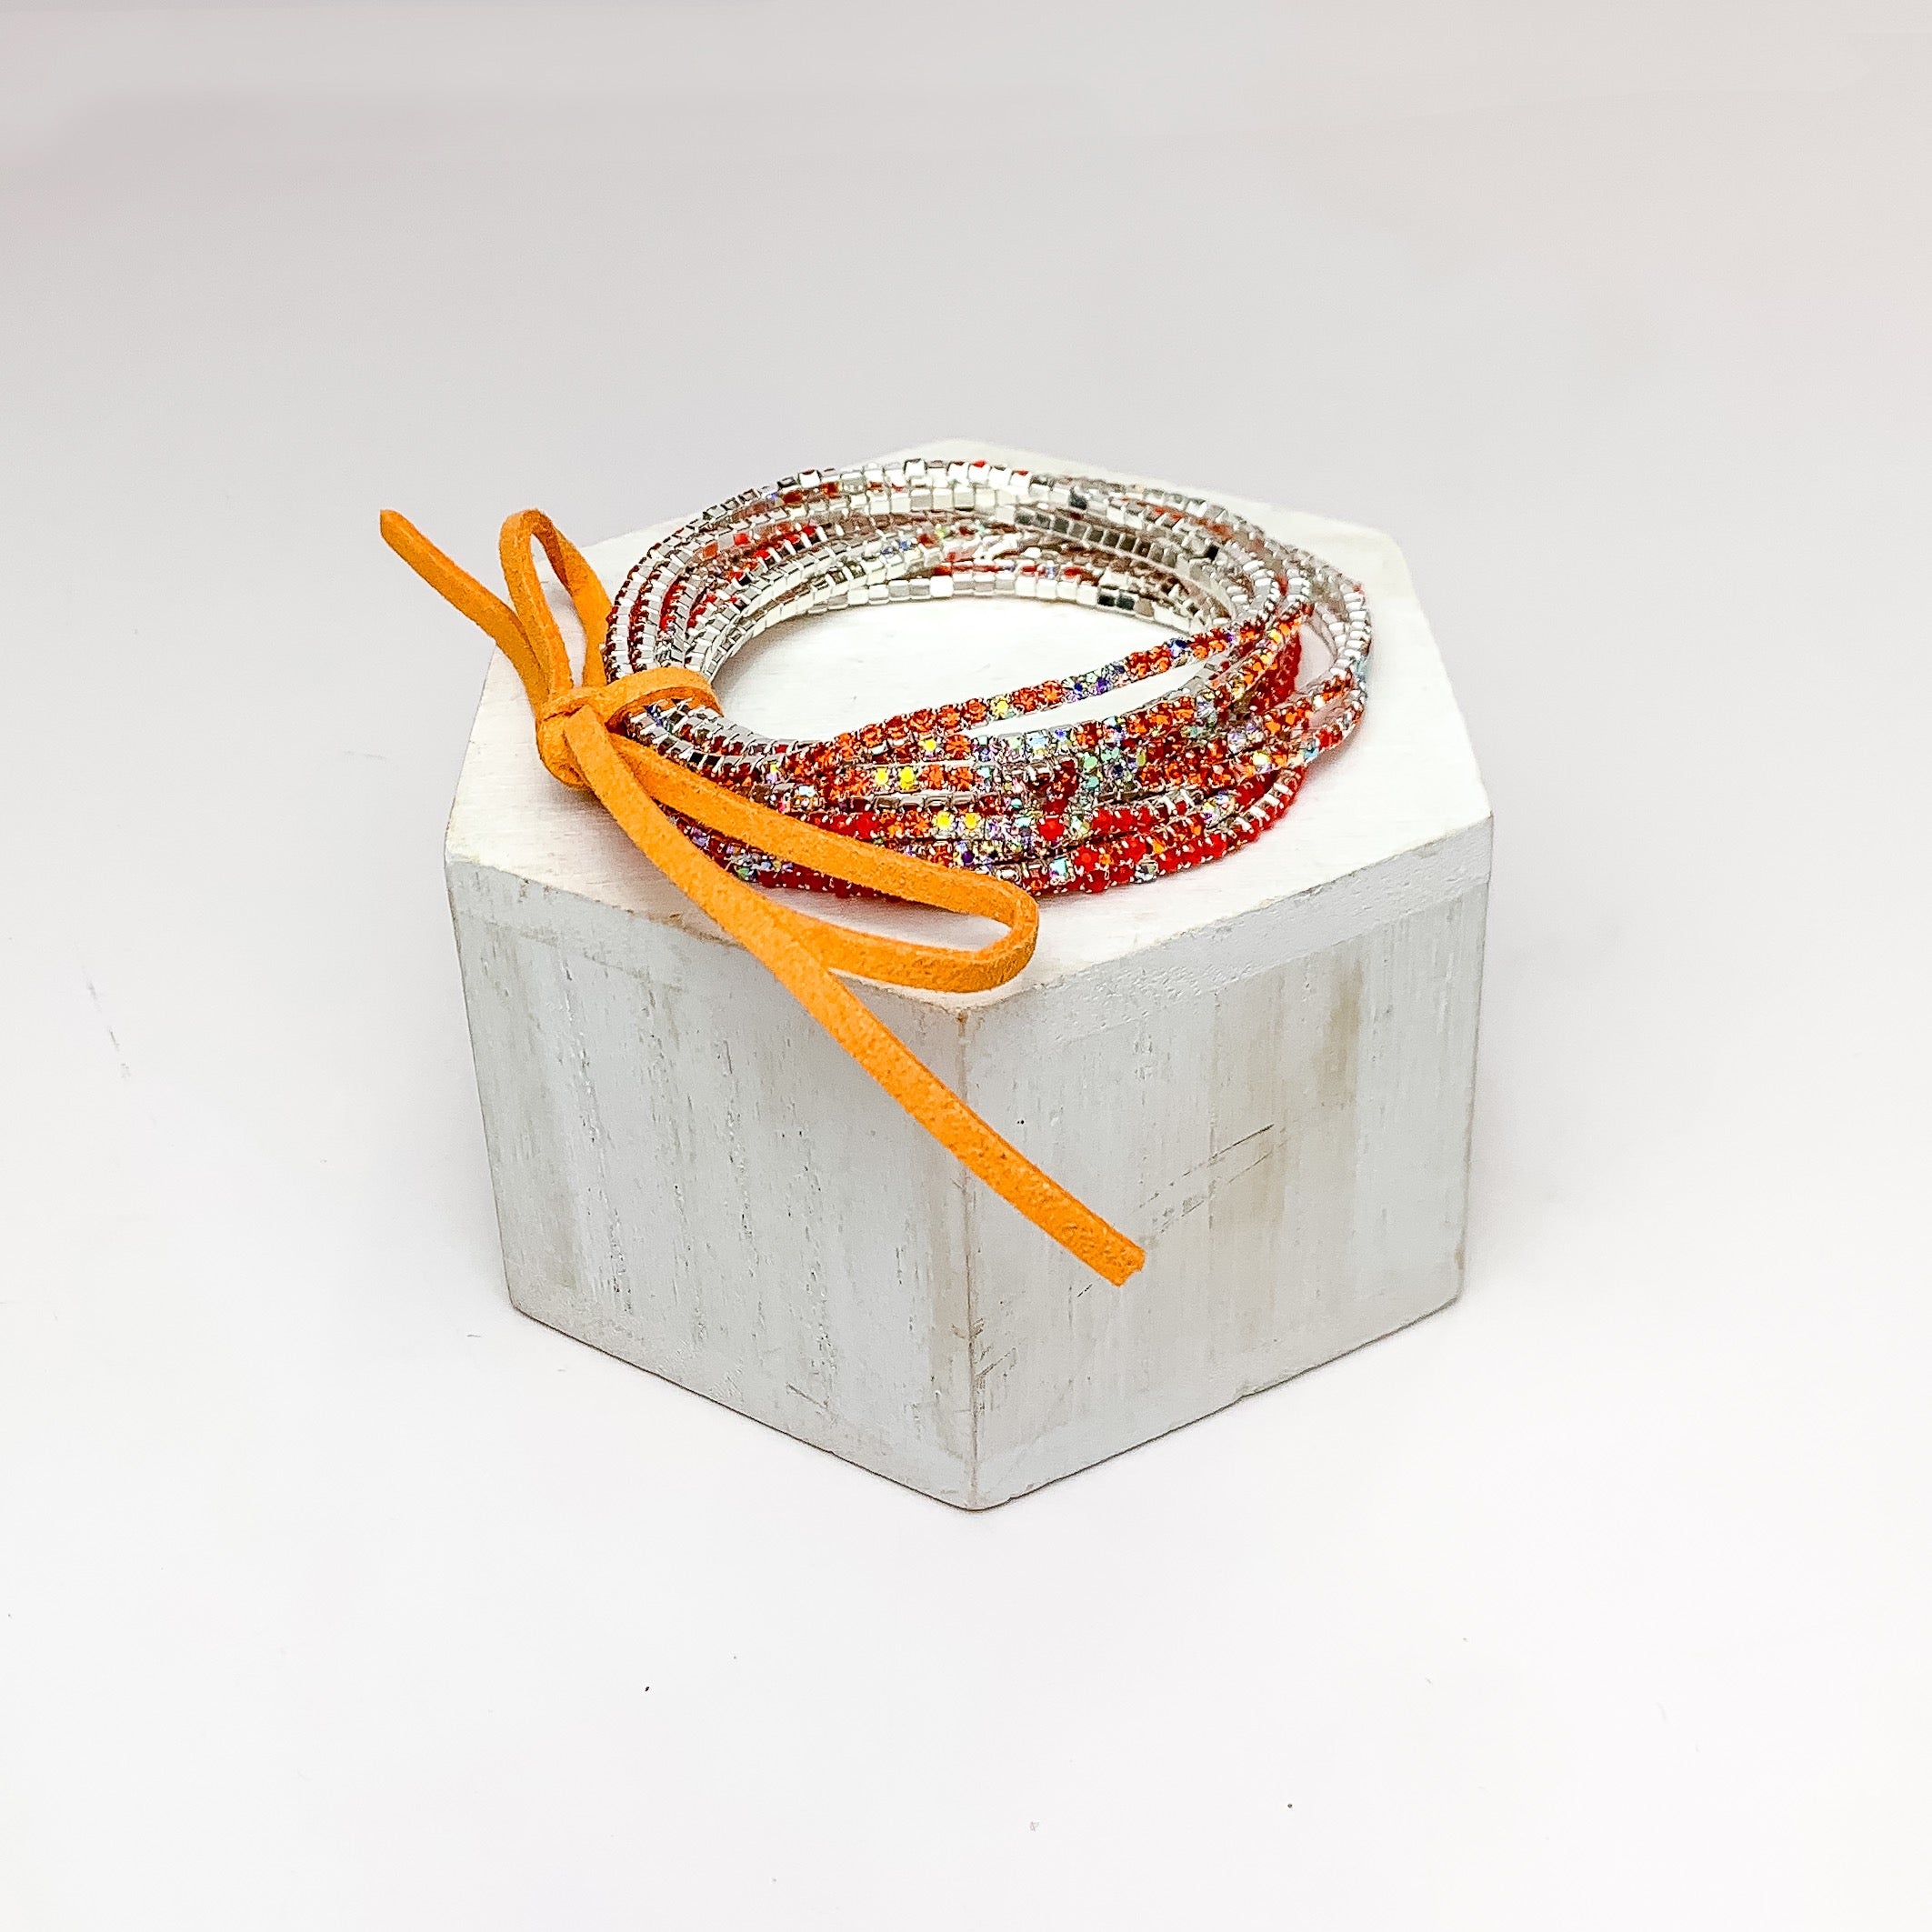 Day Party Crystals Stretchy Bracelet Set With Bow in Orange. Pictured on a white background with the jewelry sitting on a white podium.